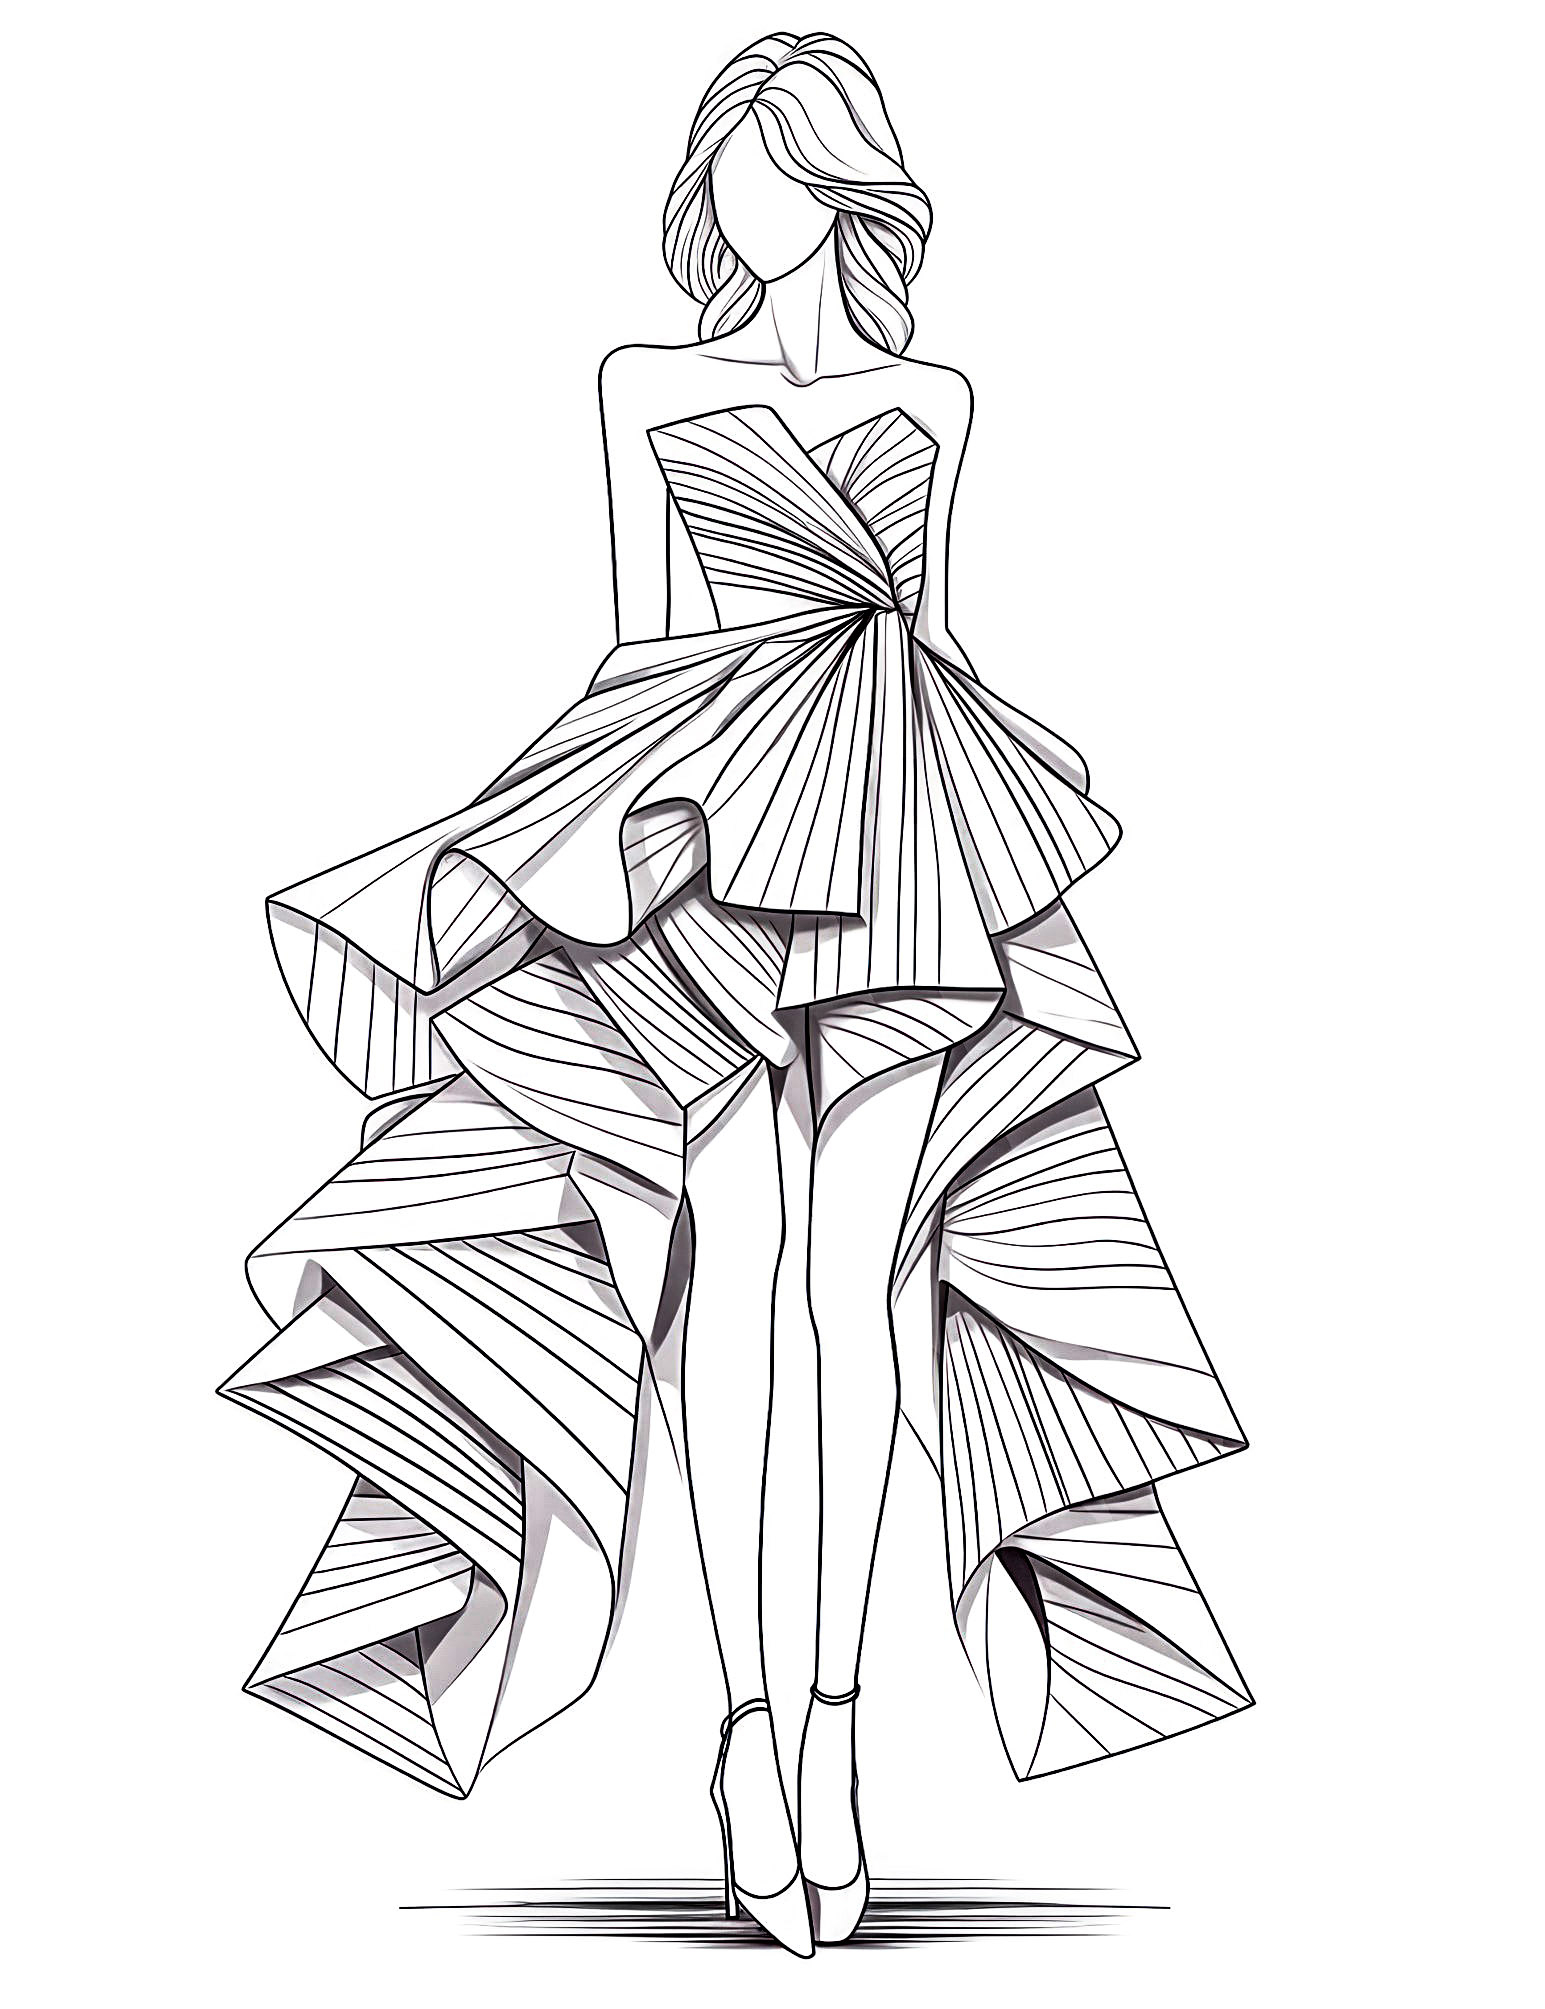 Stunning dress coloring pages for kids and adults